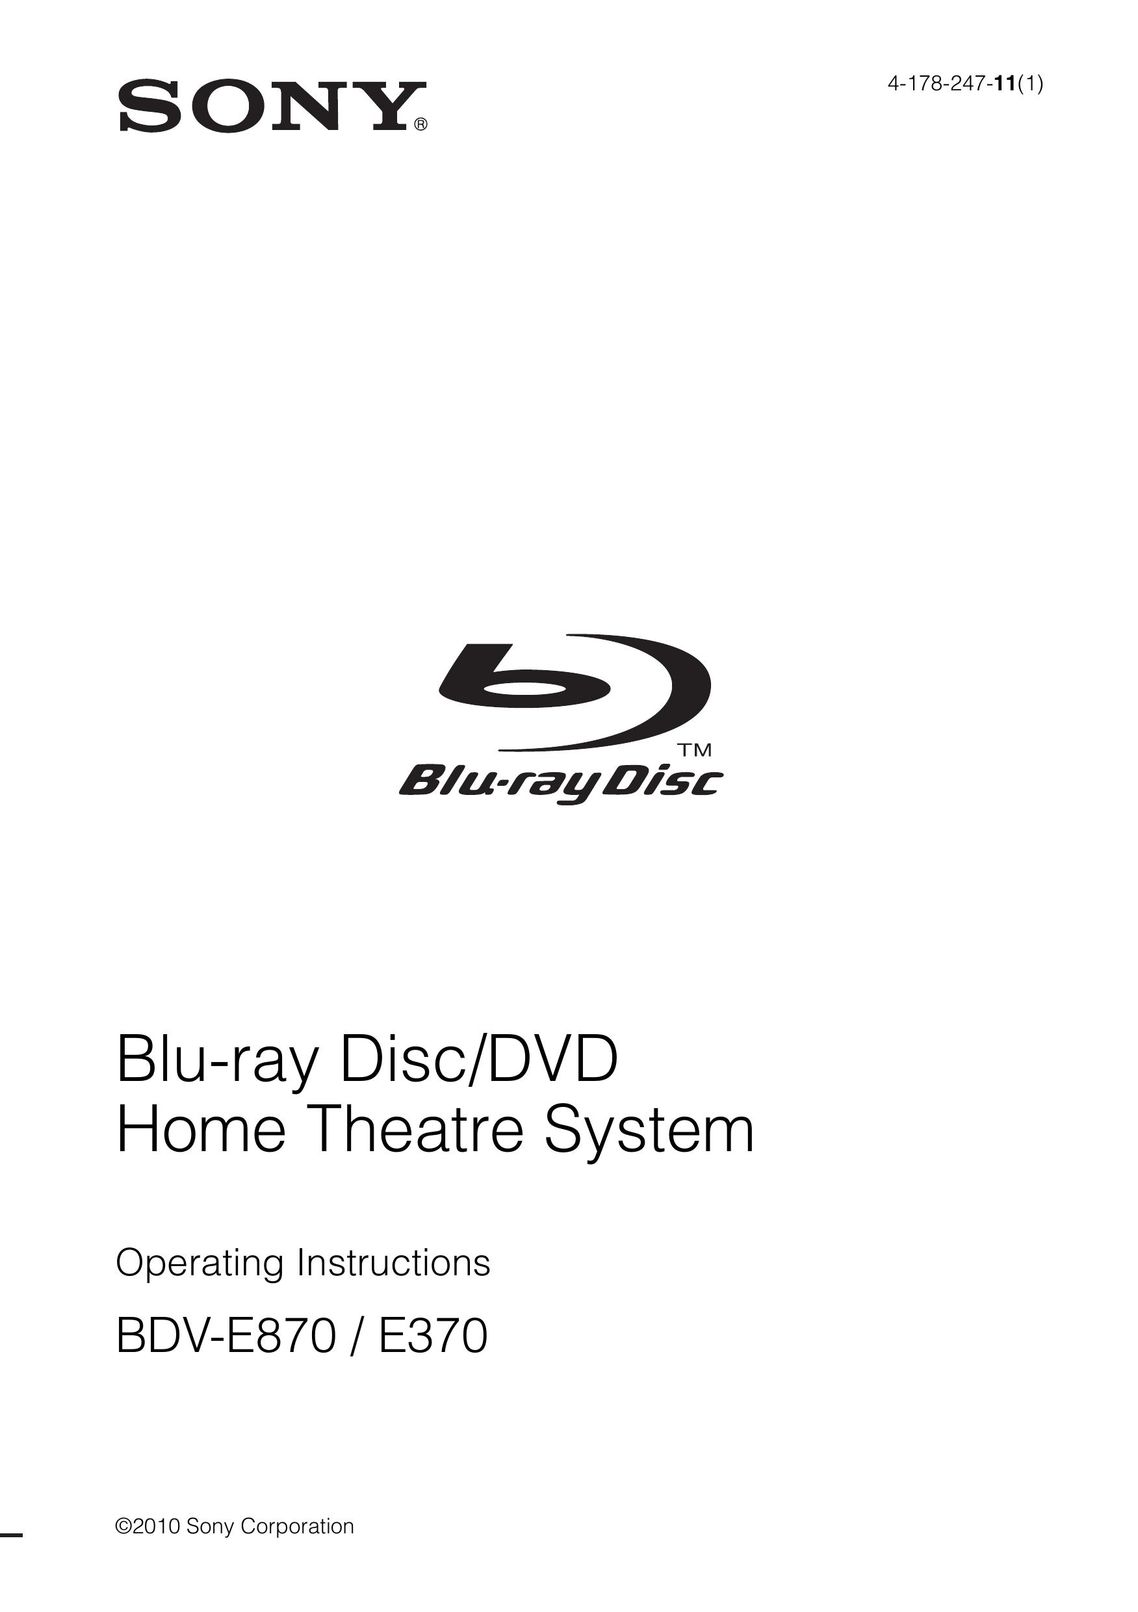 Sony 4-178-247-11(1) Home Theater System User Manual